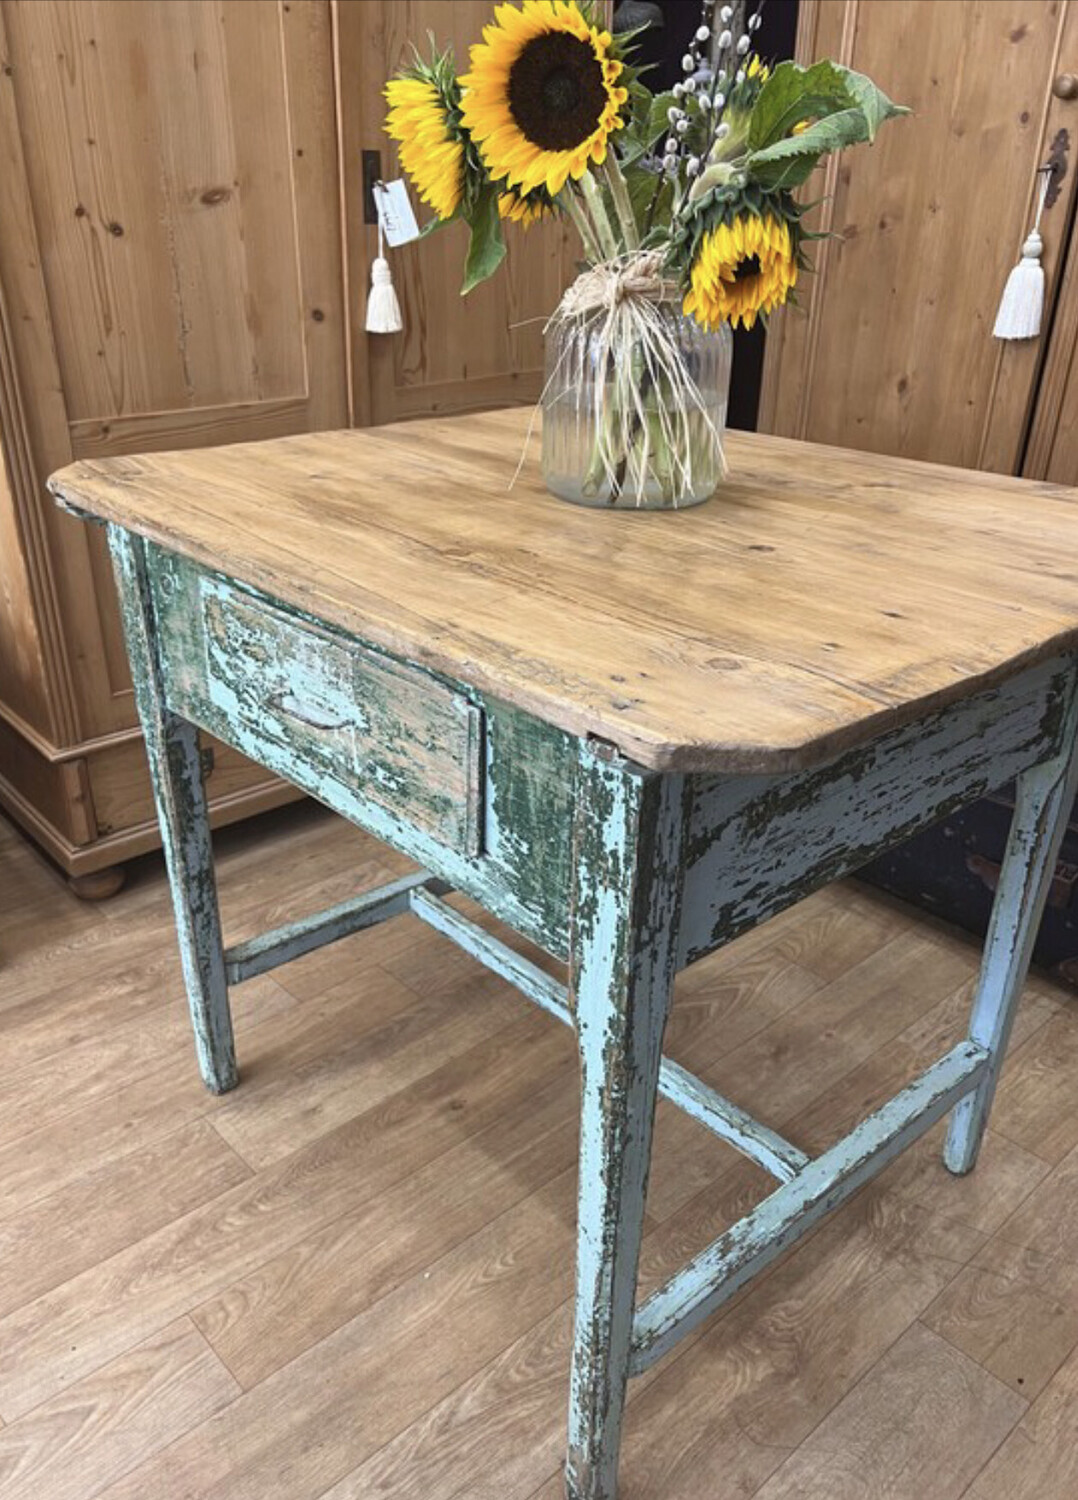 Antique Pine Table / Console / Kitchen Island